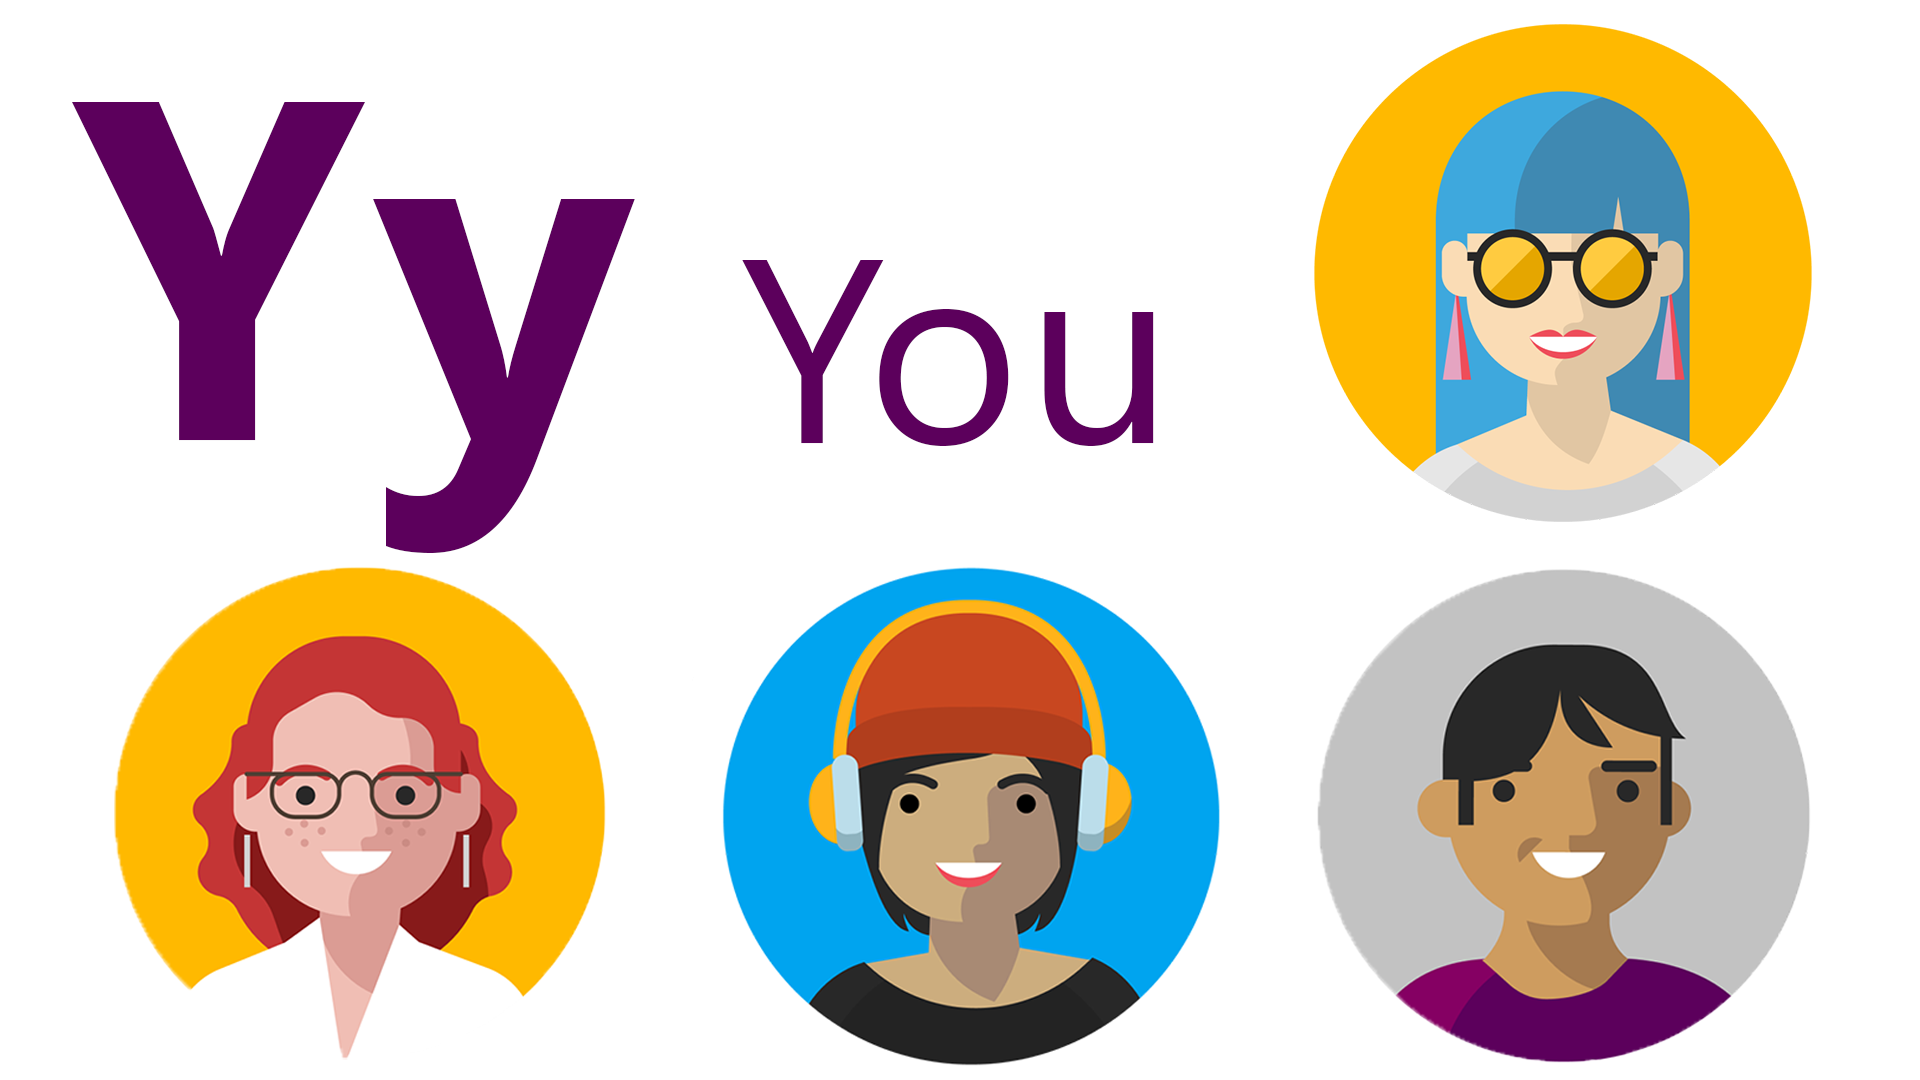 Y is for you: Avatars of a female with red hair, freckles and glasses wearing white earrings and white shirt, a male with short black hair and purple shirt, a female with black hair, orange beanie, yellow headphones, and black shirt, and a female with blue hair and bangs, yellow sunglasses, pink earrings, and white shirt.